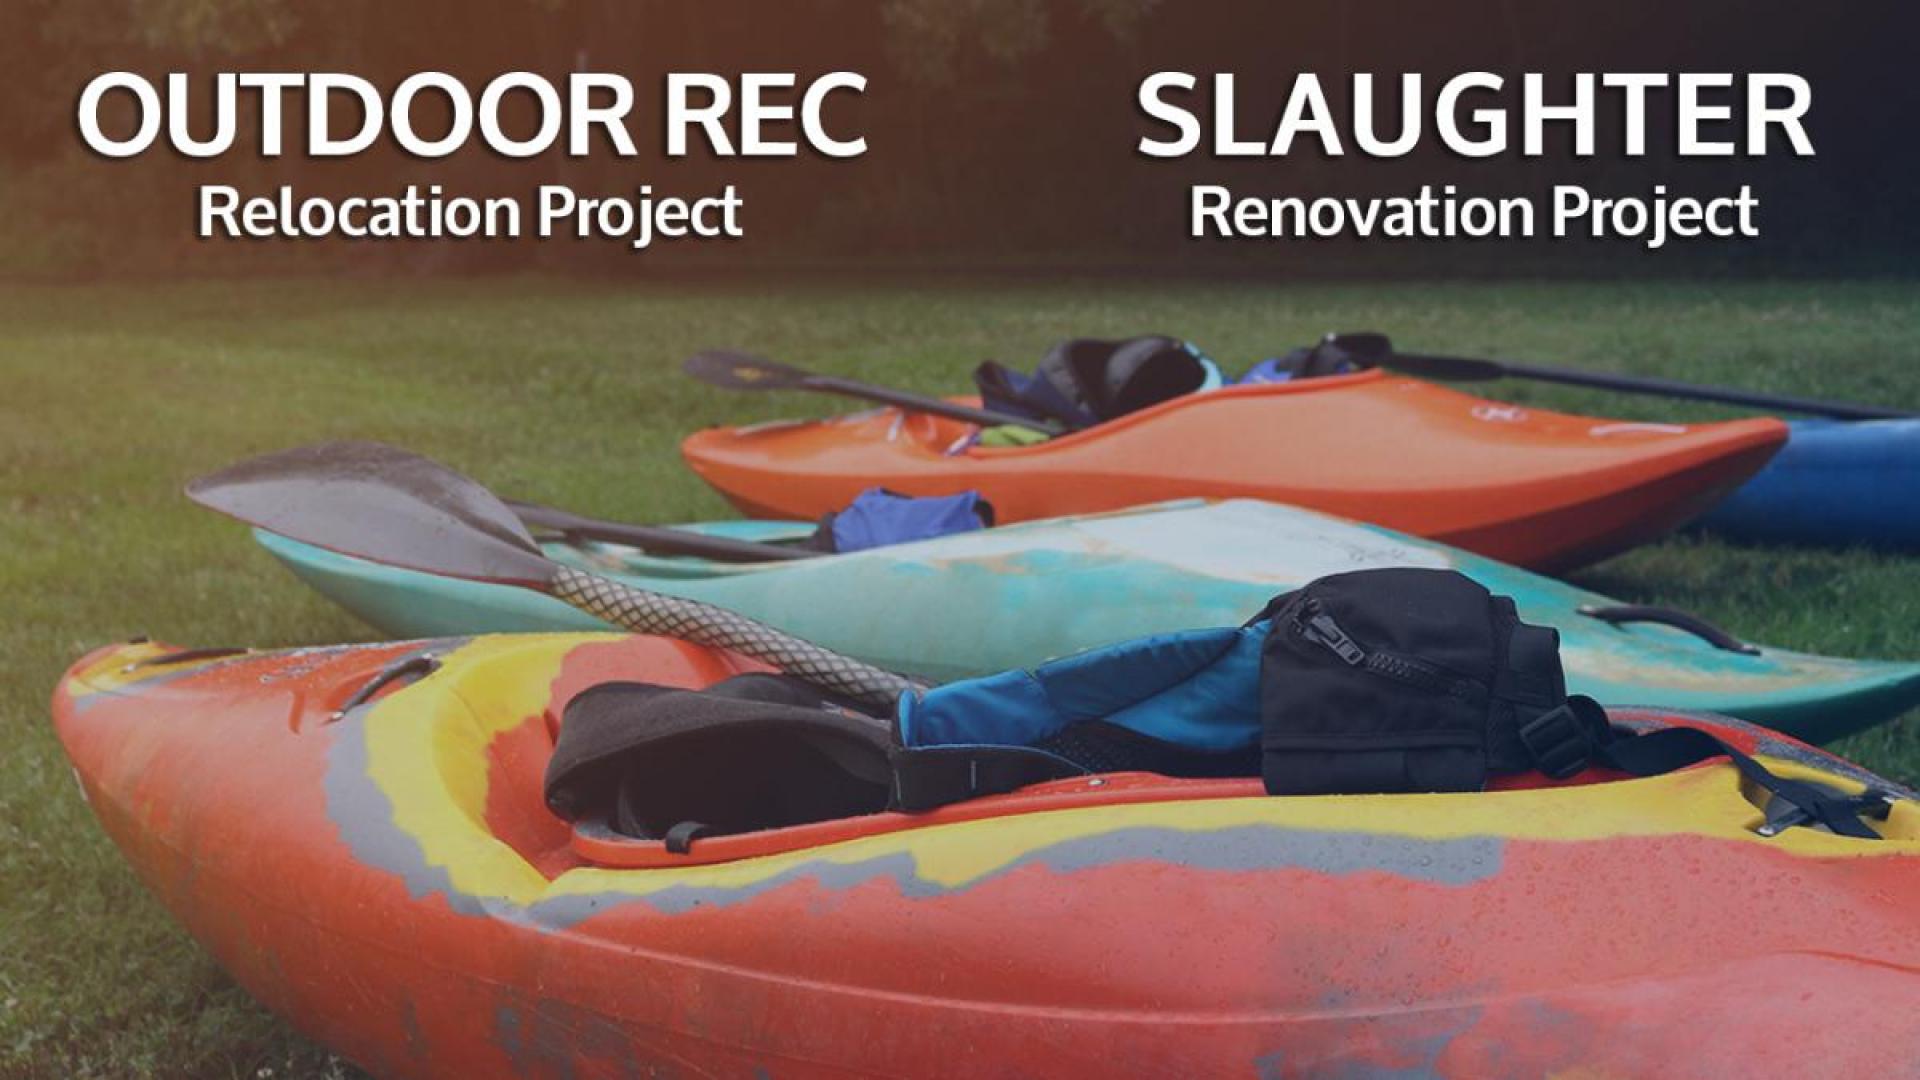 Slaughter Renovation and Outdoor Adventure Relocation